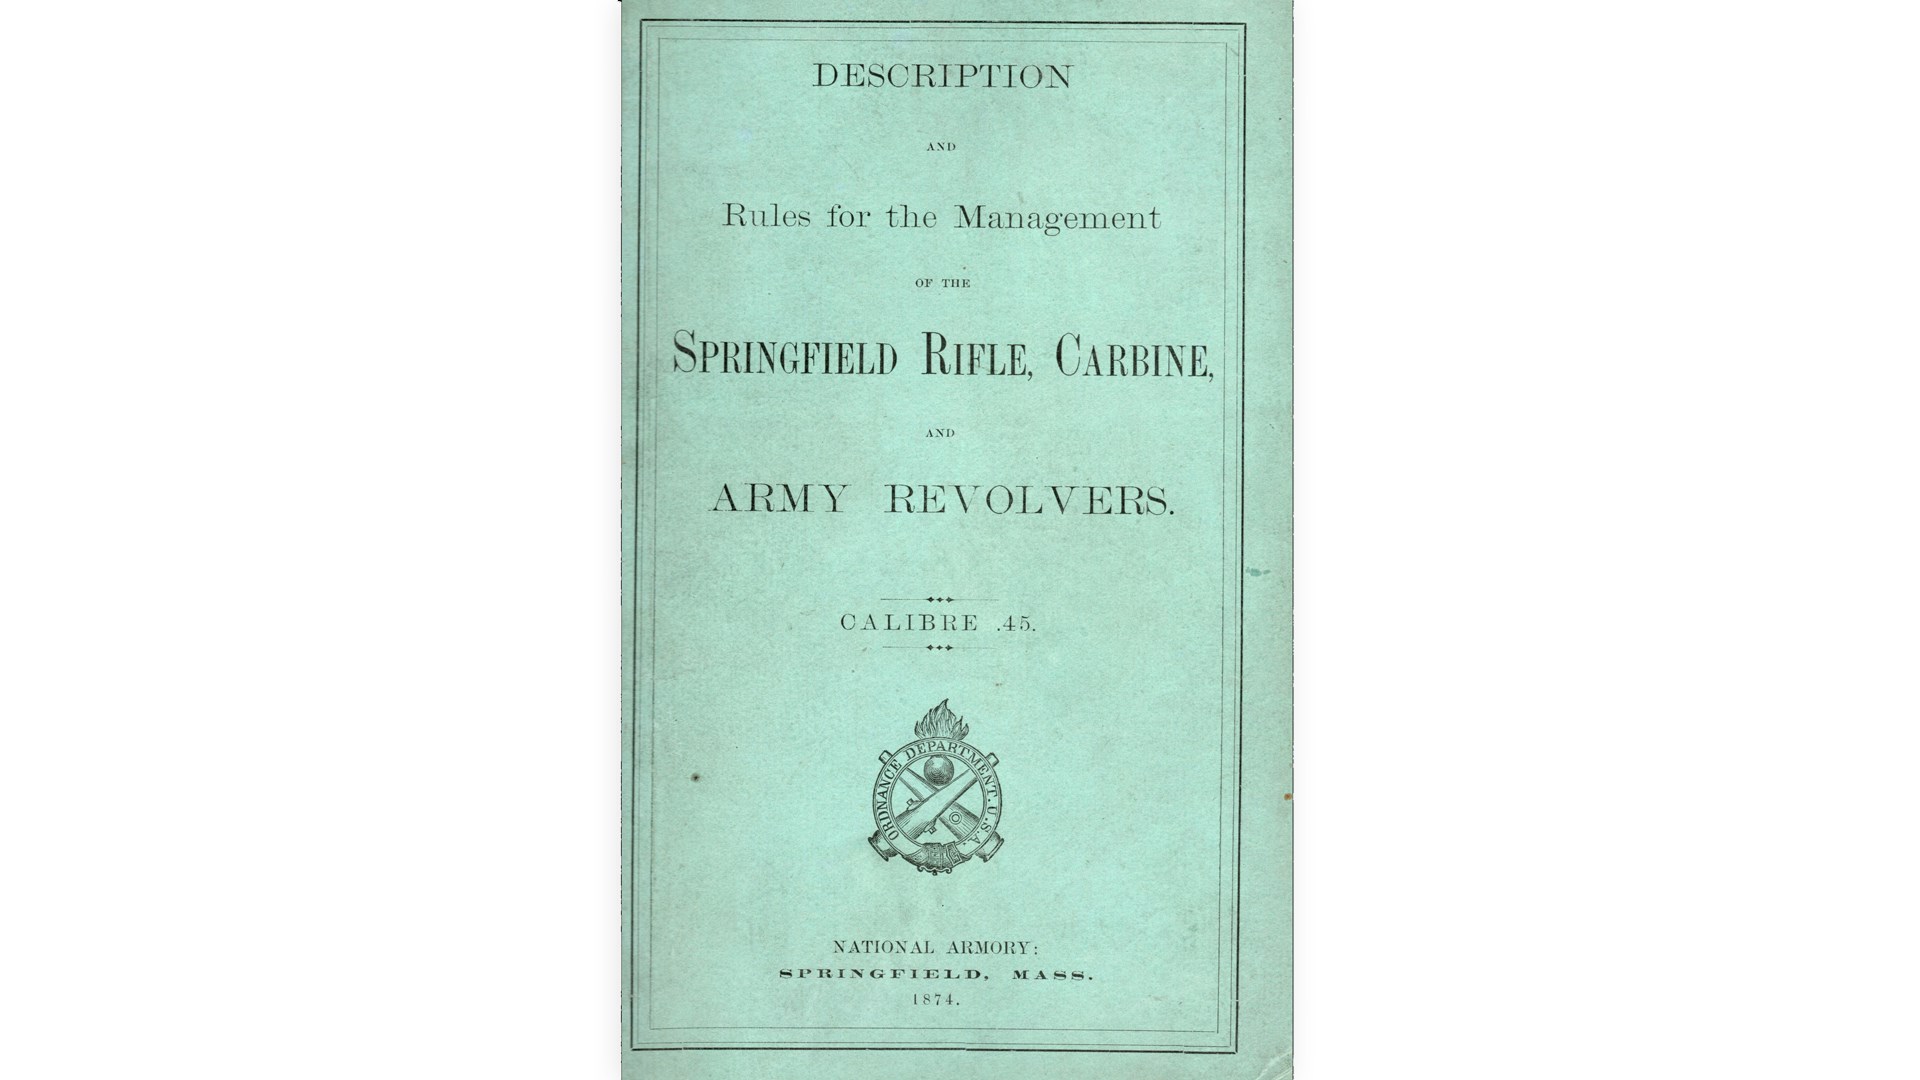 Standard manual for the Trapdoor weapons titled “Description and Rules for the Management of Springfield Rifle, Carbine and Army Revolver, Calibre .45” This original copy is dated 1874.Author’s collection